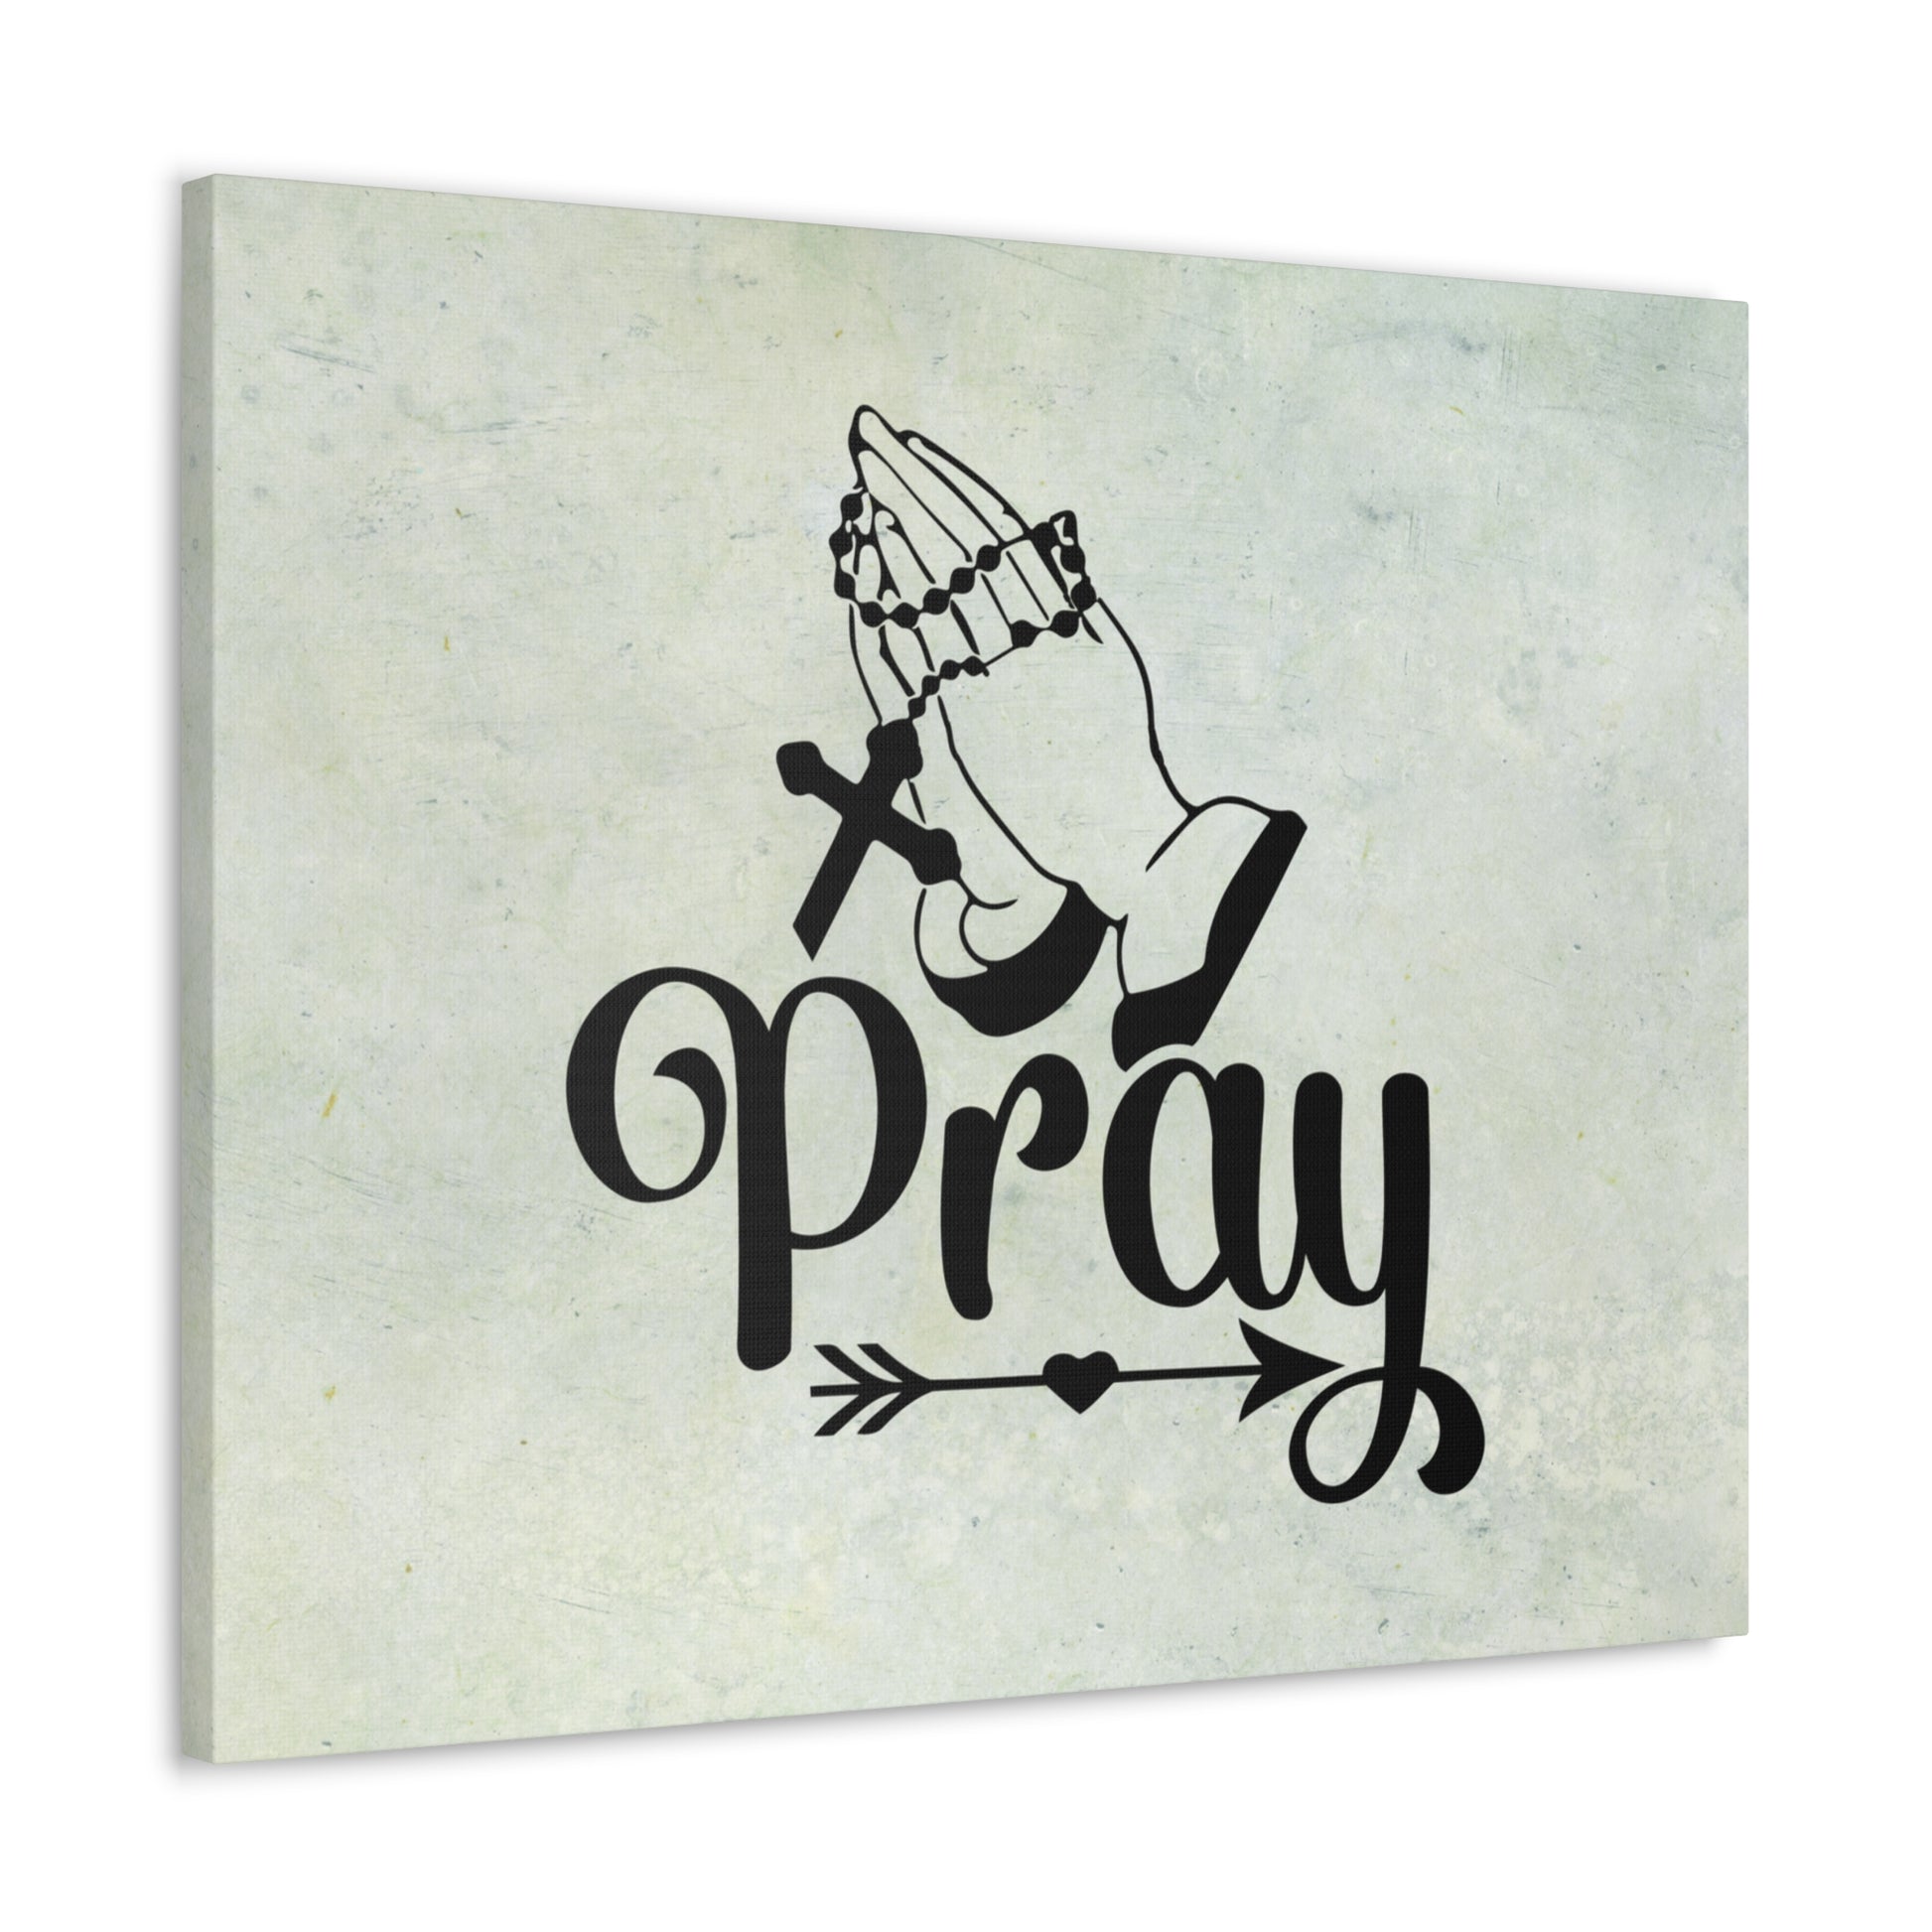 "Pray" Wall Art - Weave Got Gifts - Unique Gifts You Won’t Find Anywhere Else!